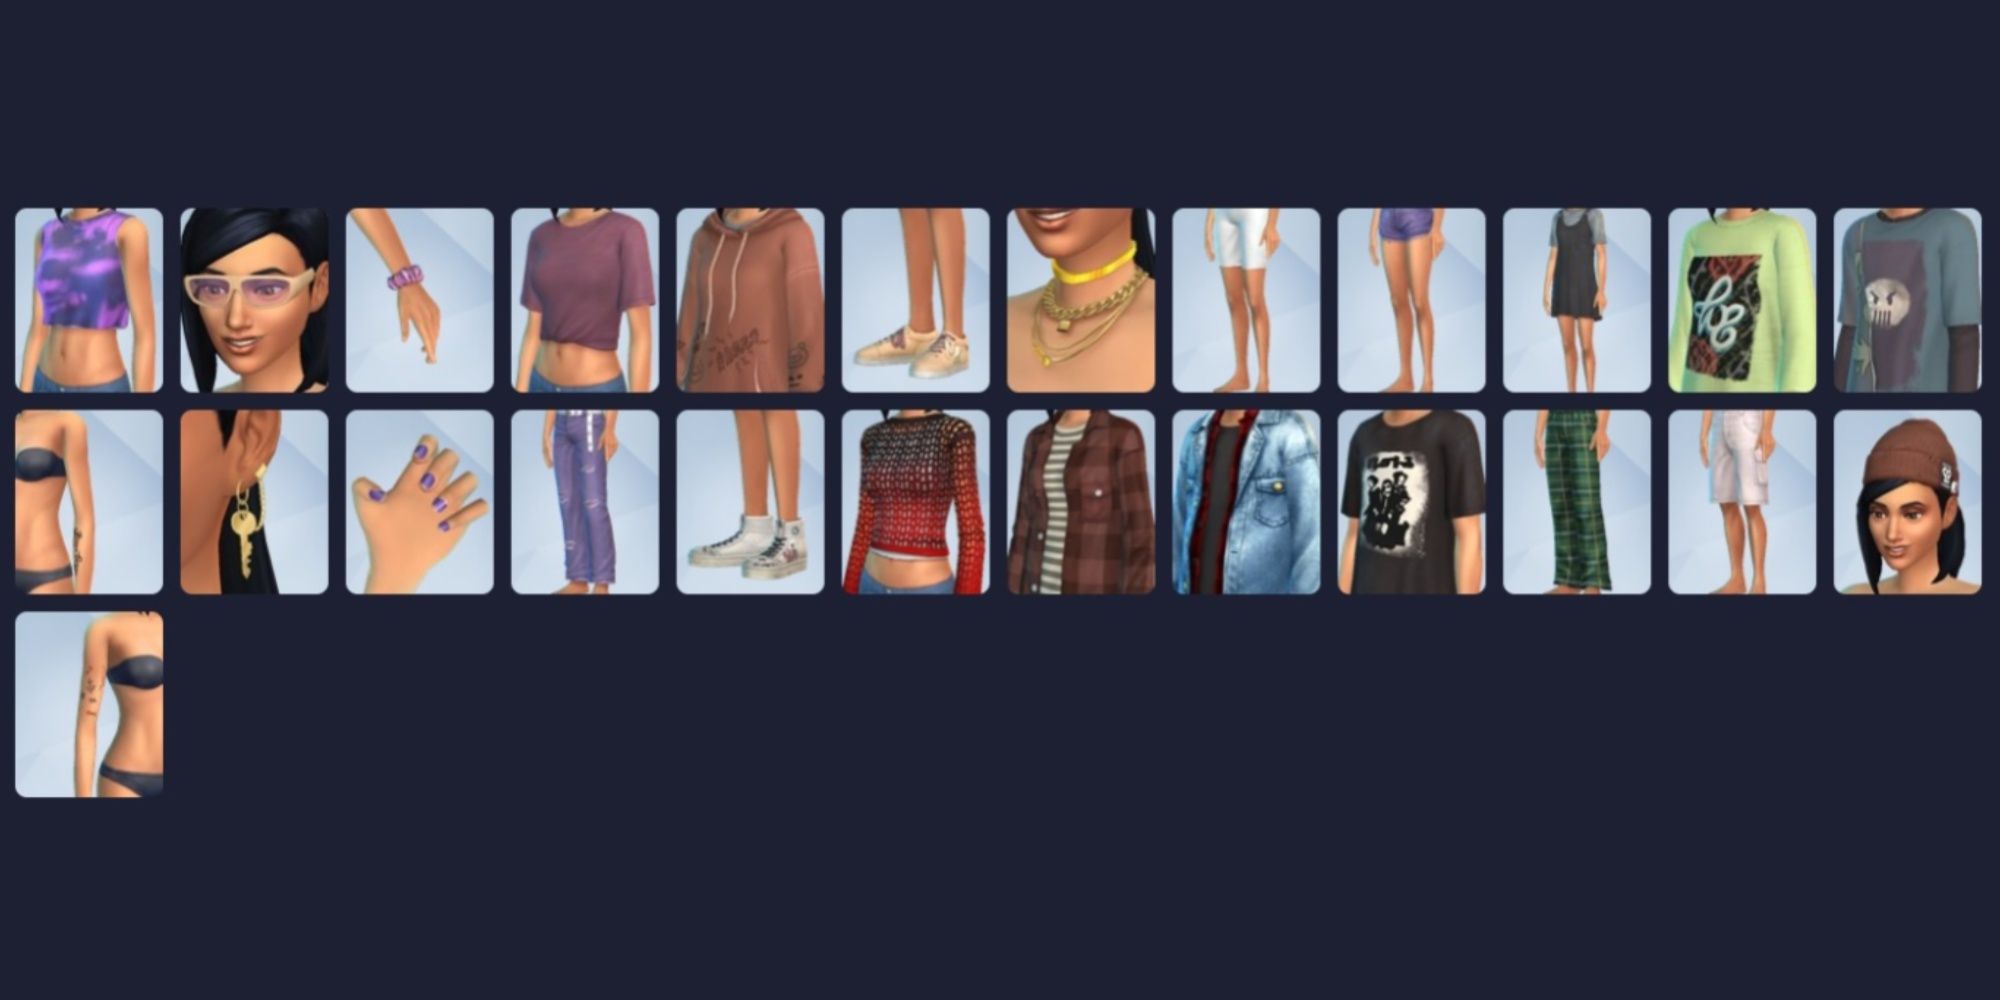 all create-a-sim items included with the grunge revival kit